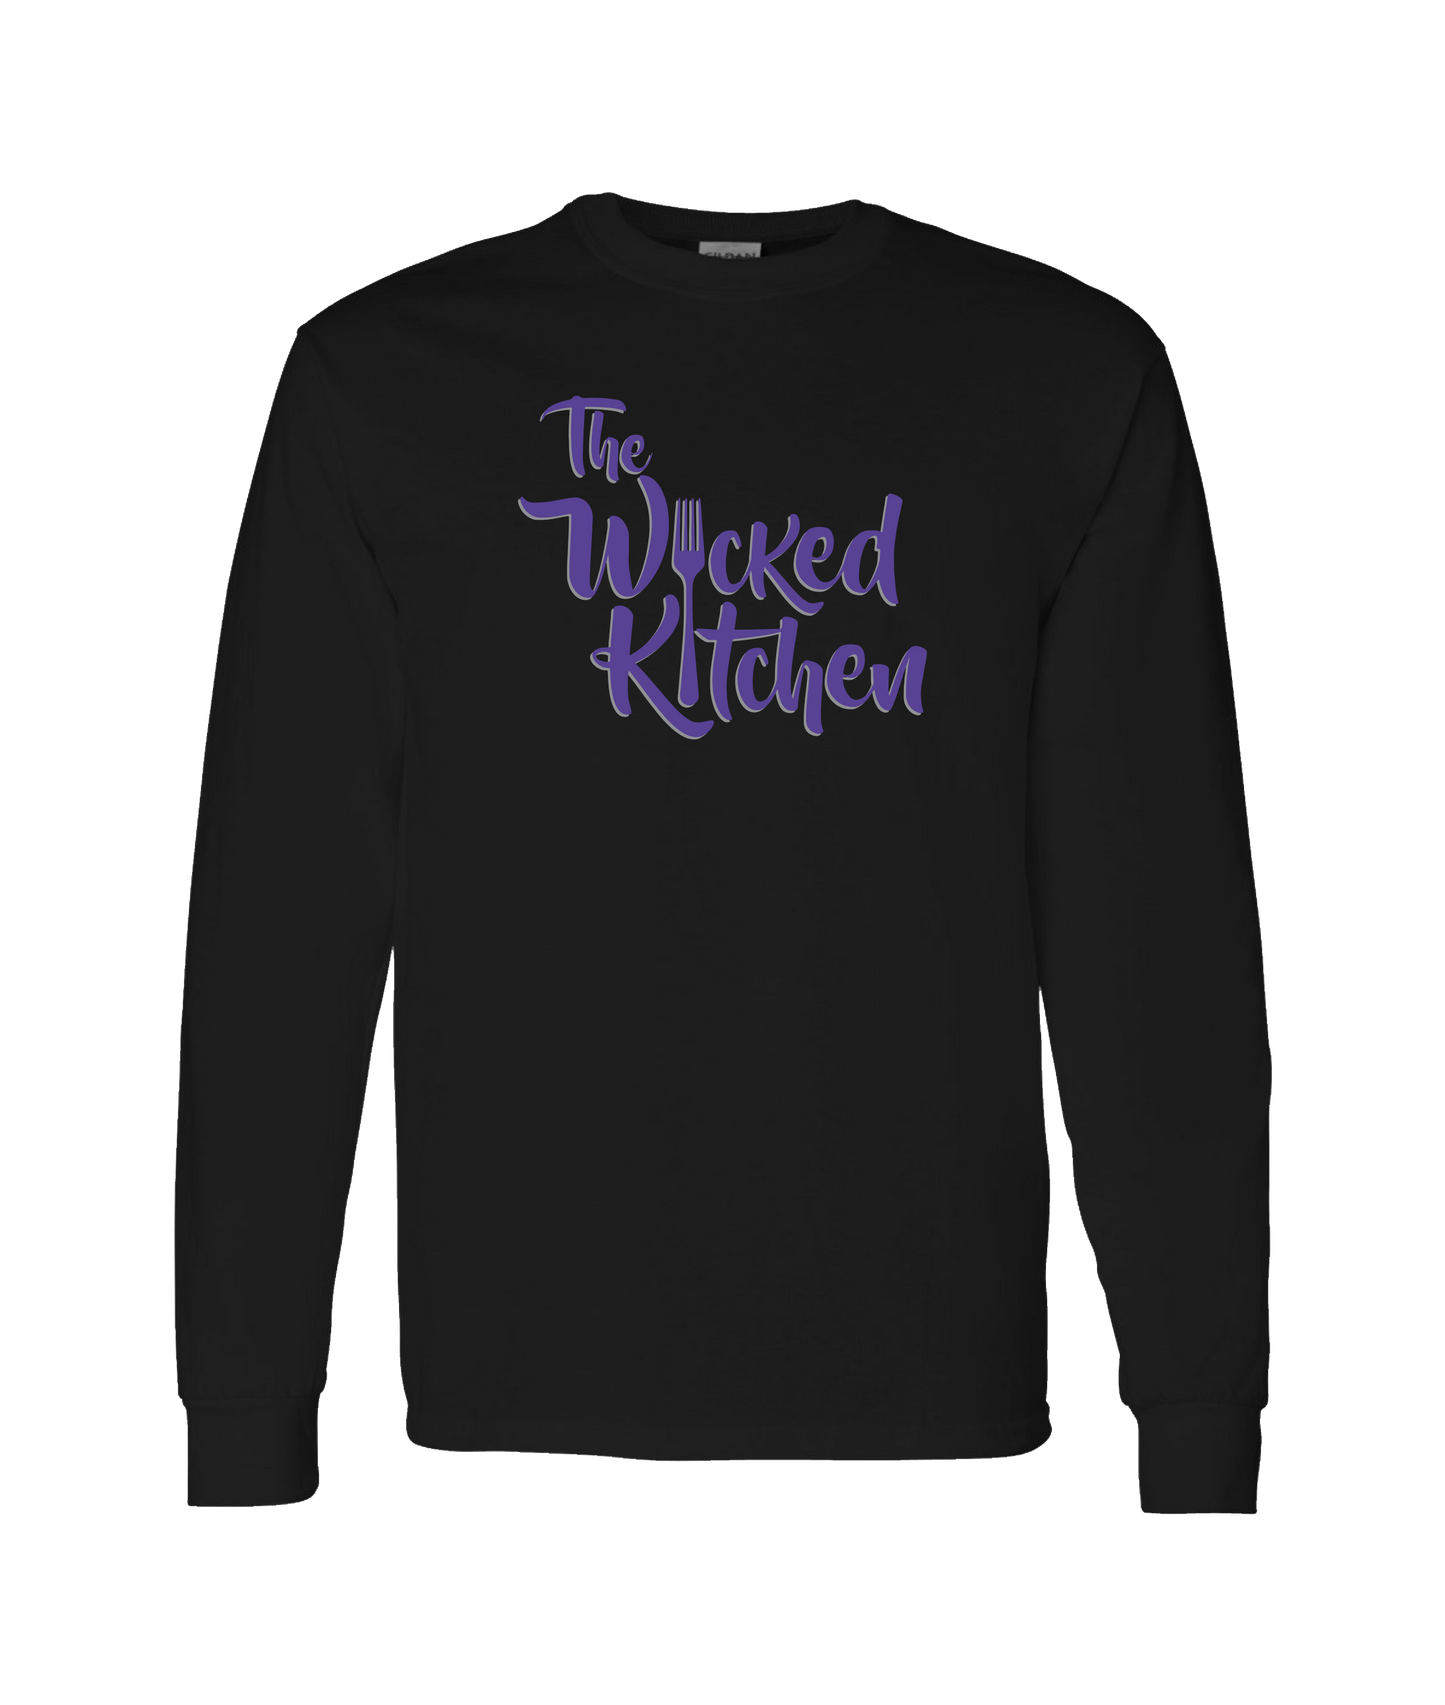 The Wicked Kitchen - Logo - Black Long Sleeve T